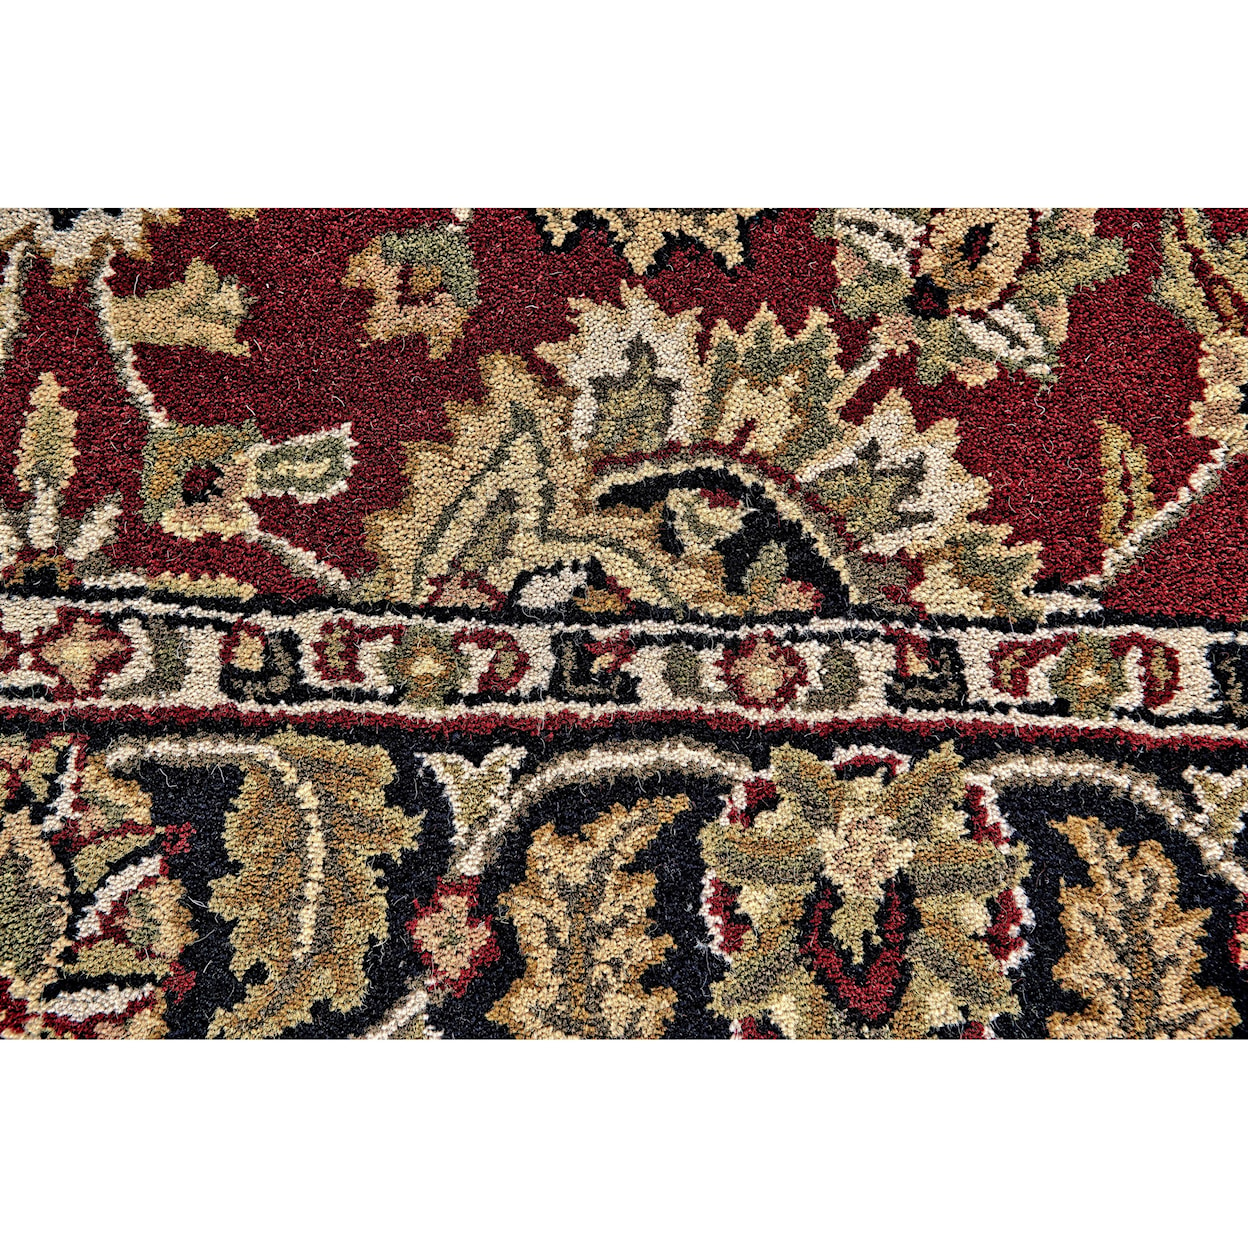 Feizy Rugs Yale Red/Black 2'-3" x 8' Runner Rug